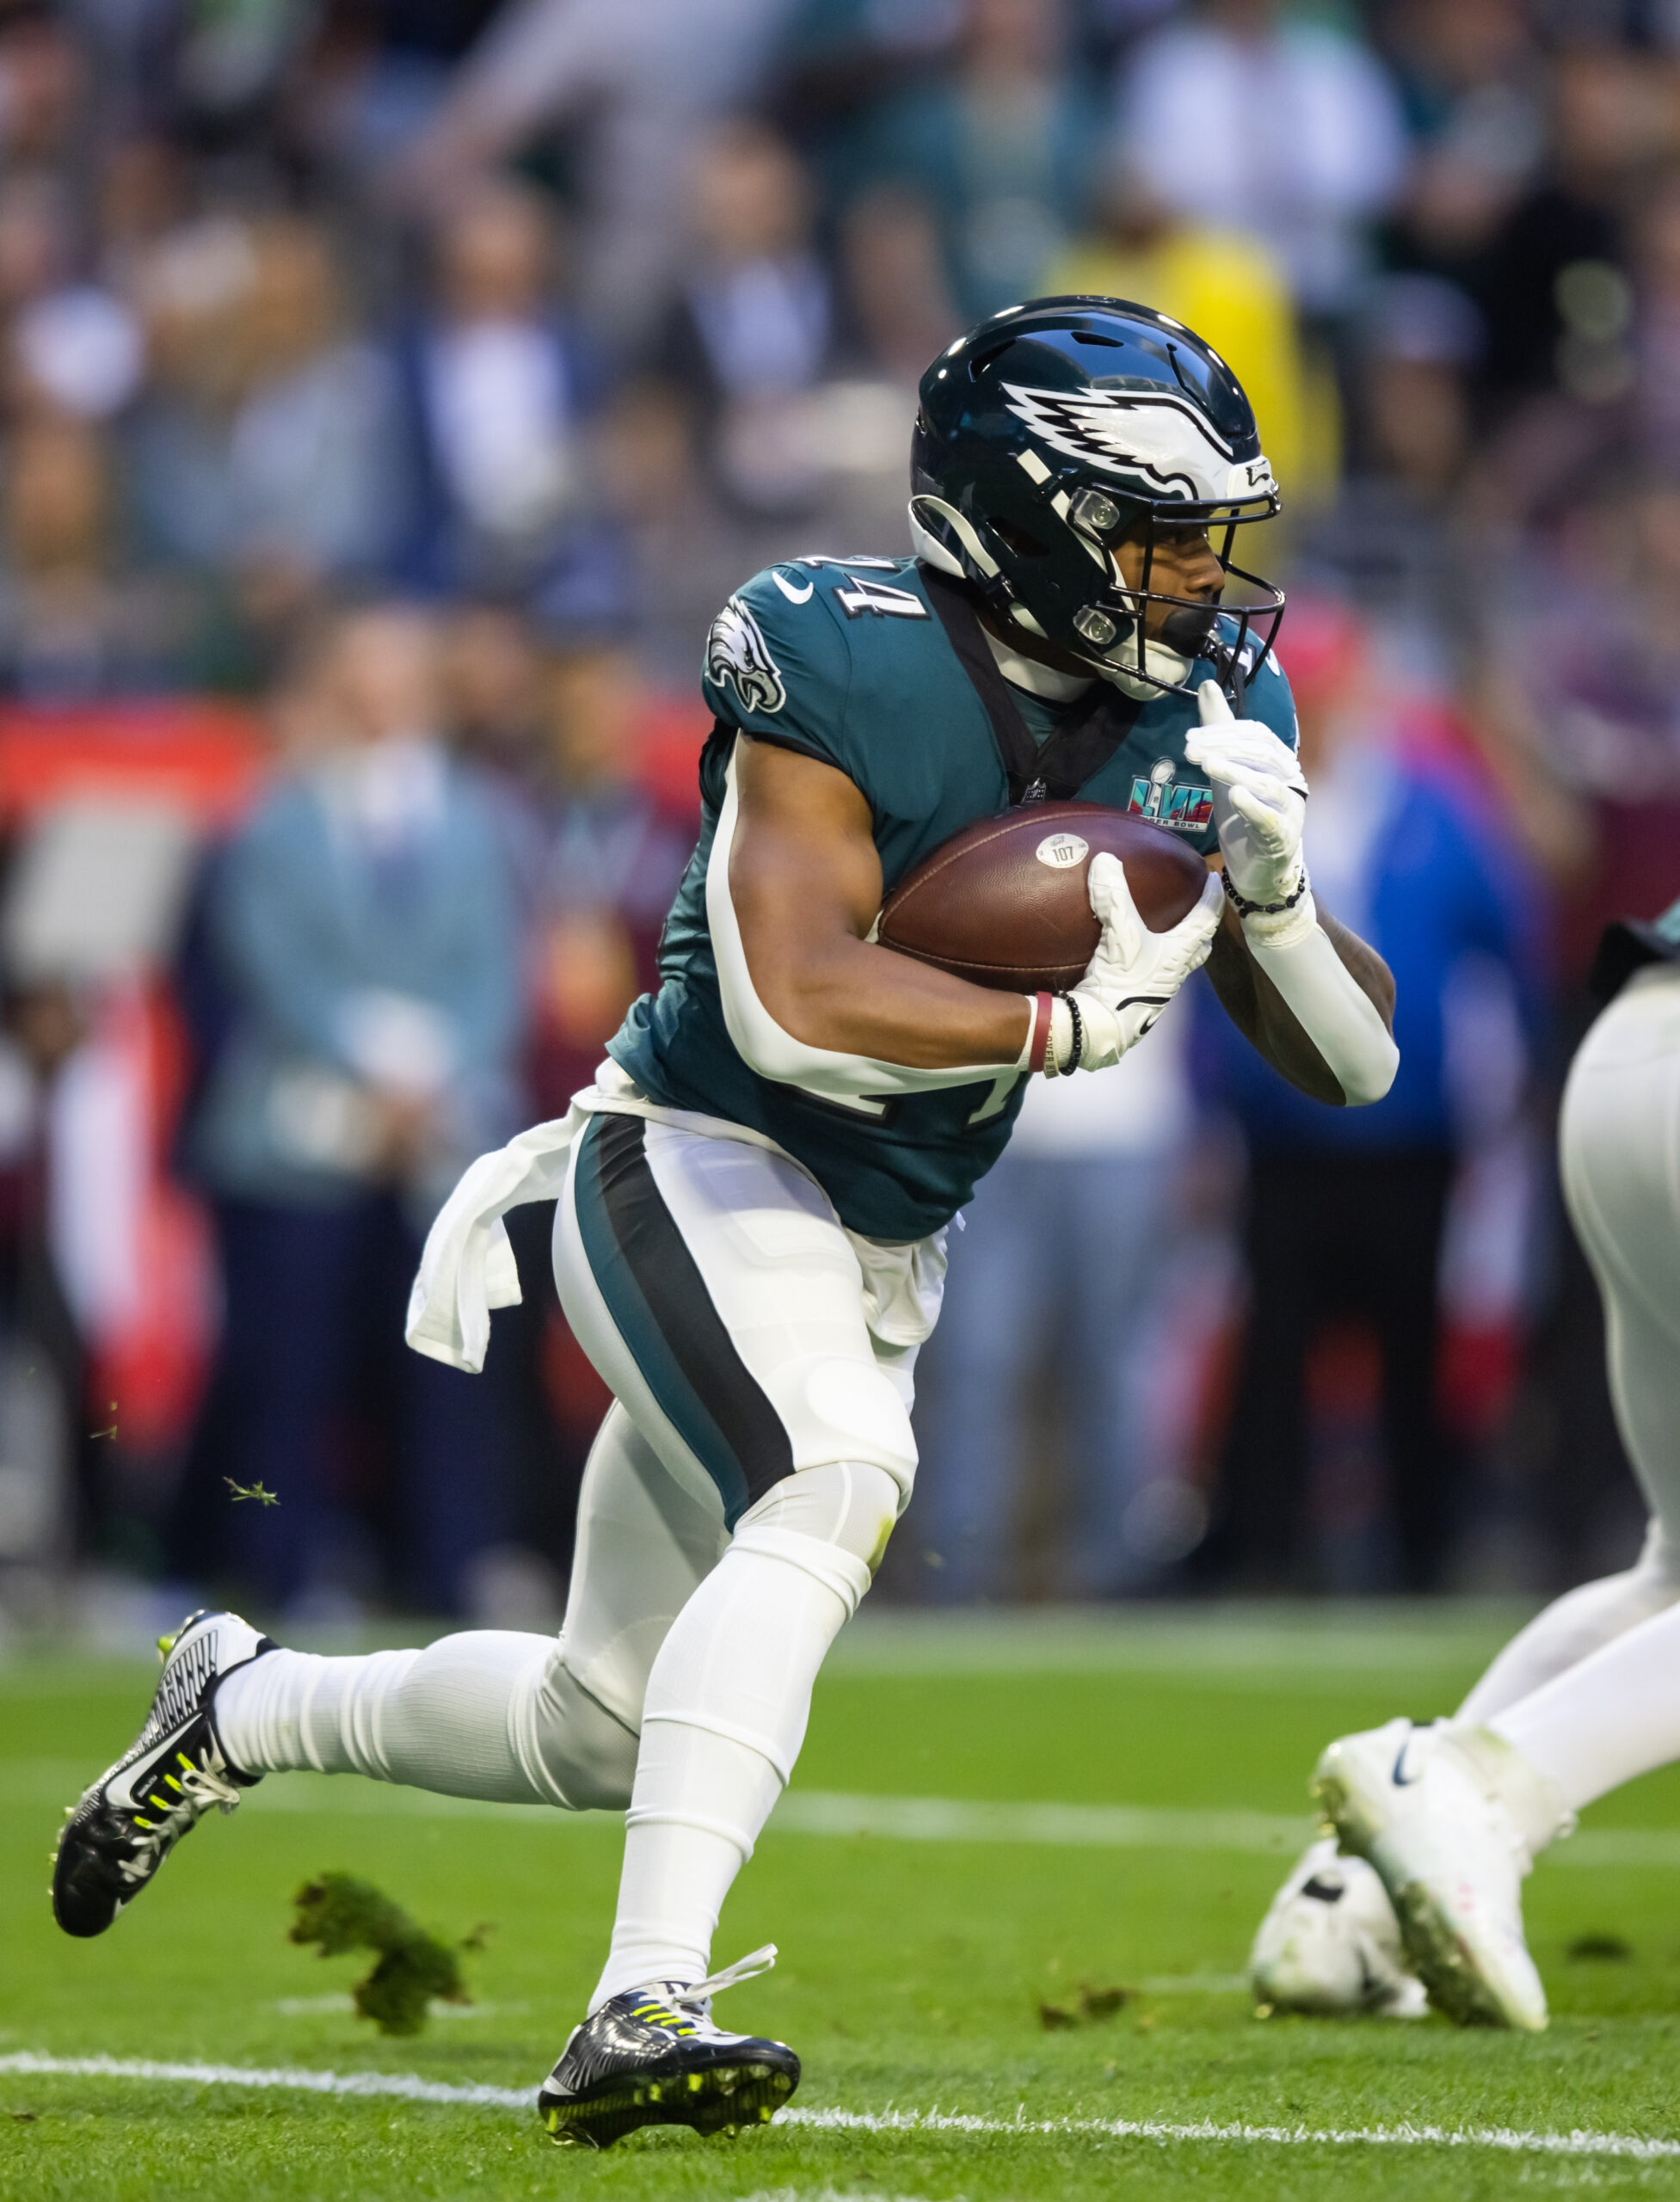 Latest On Eagles' RB Situation